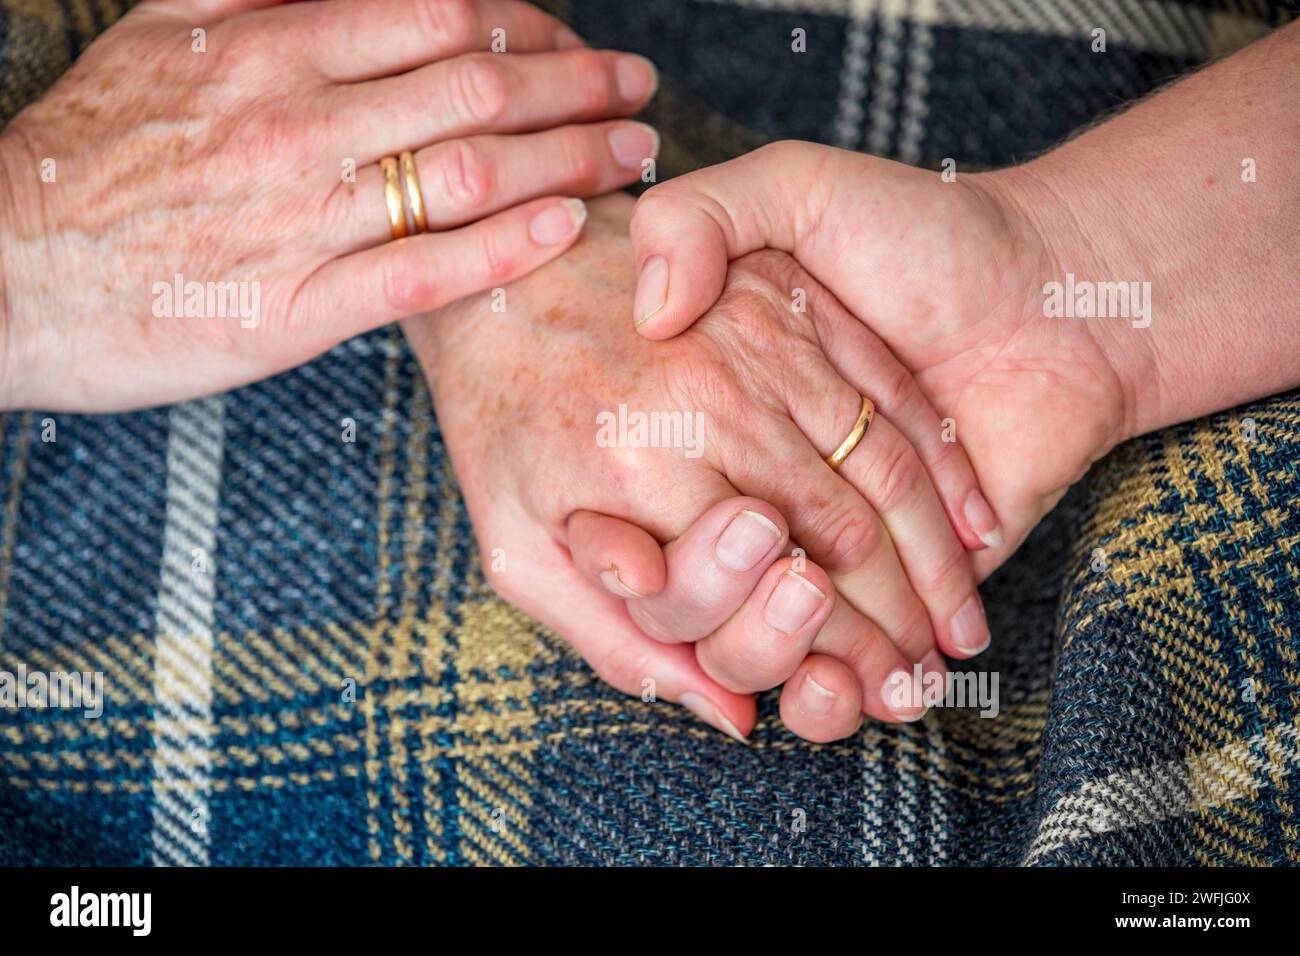 Caring Hands; Holding Hands; UK Stock Photo